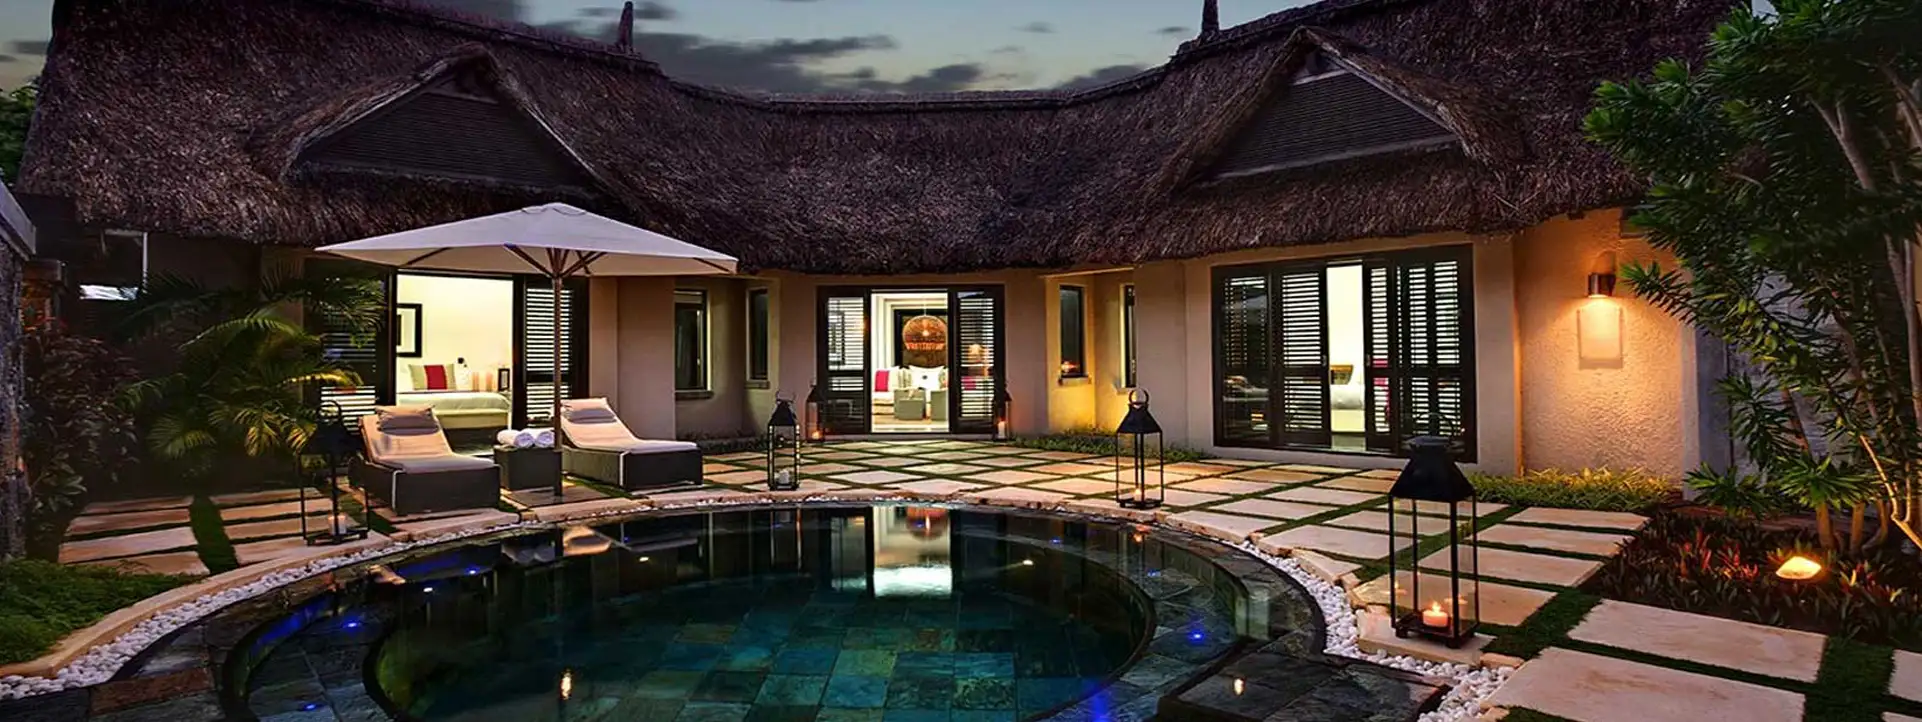 LUX-BELLE-MARE-MAURITIUS-Best-honeymoon-packages-pool-villa-in-evening